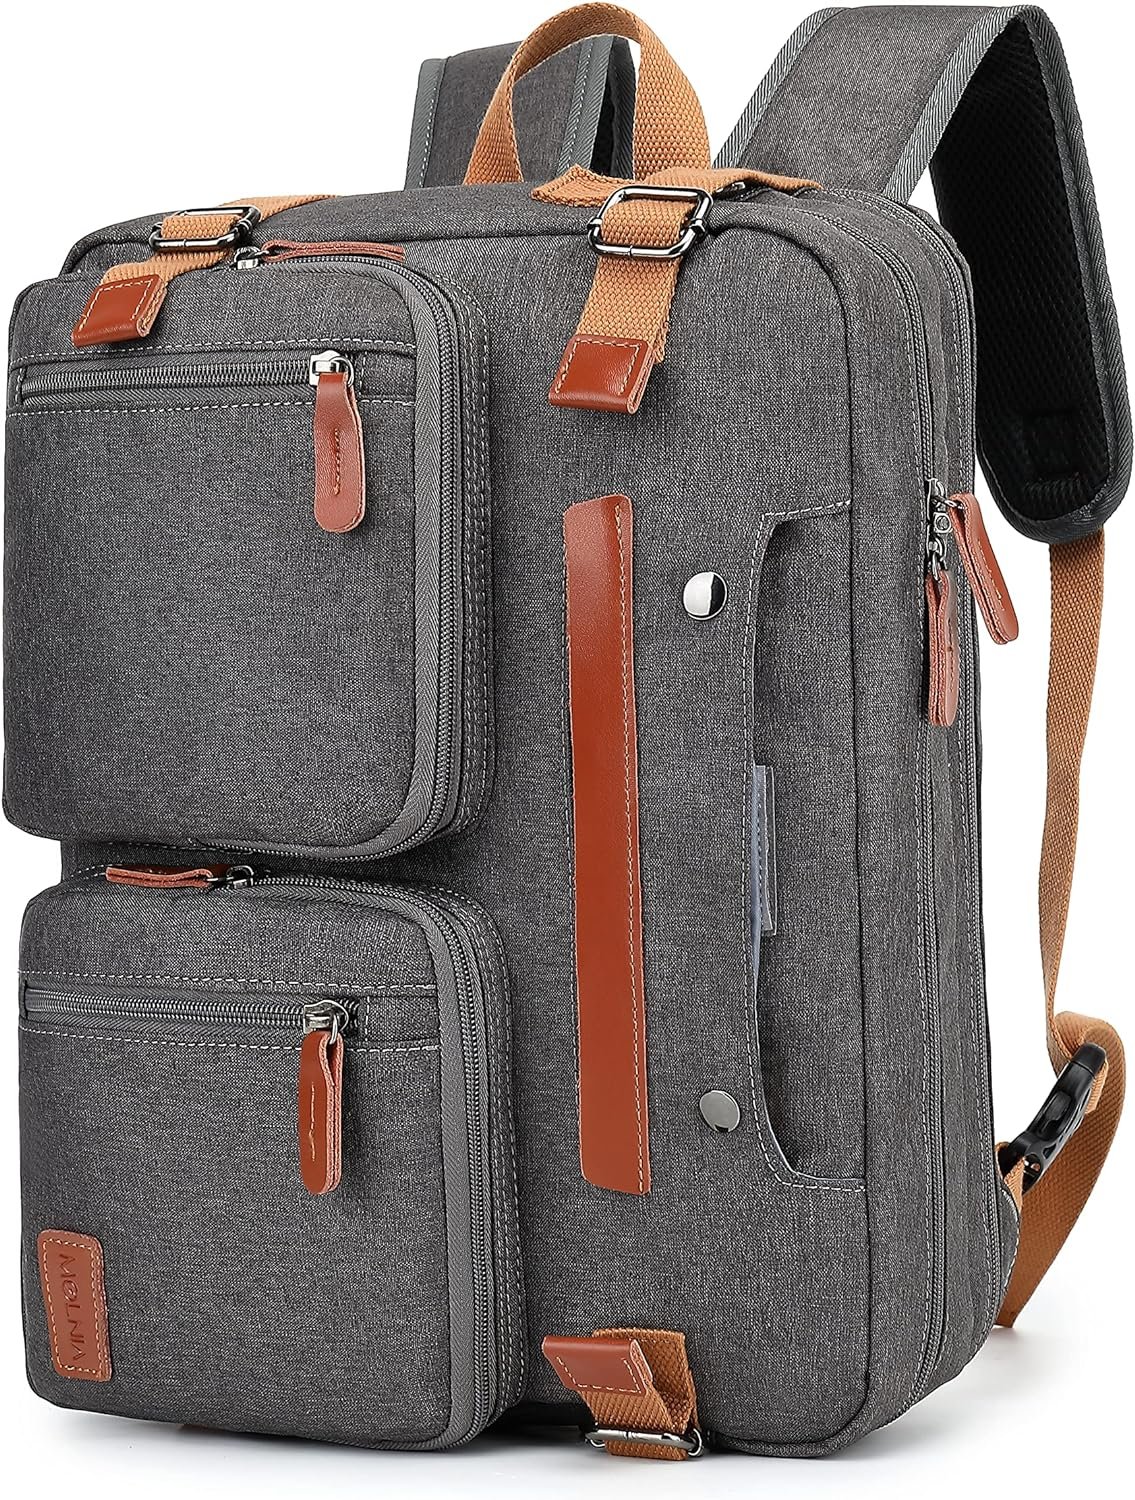 MOLNIA Laptop Backpack Review